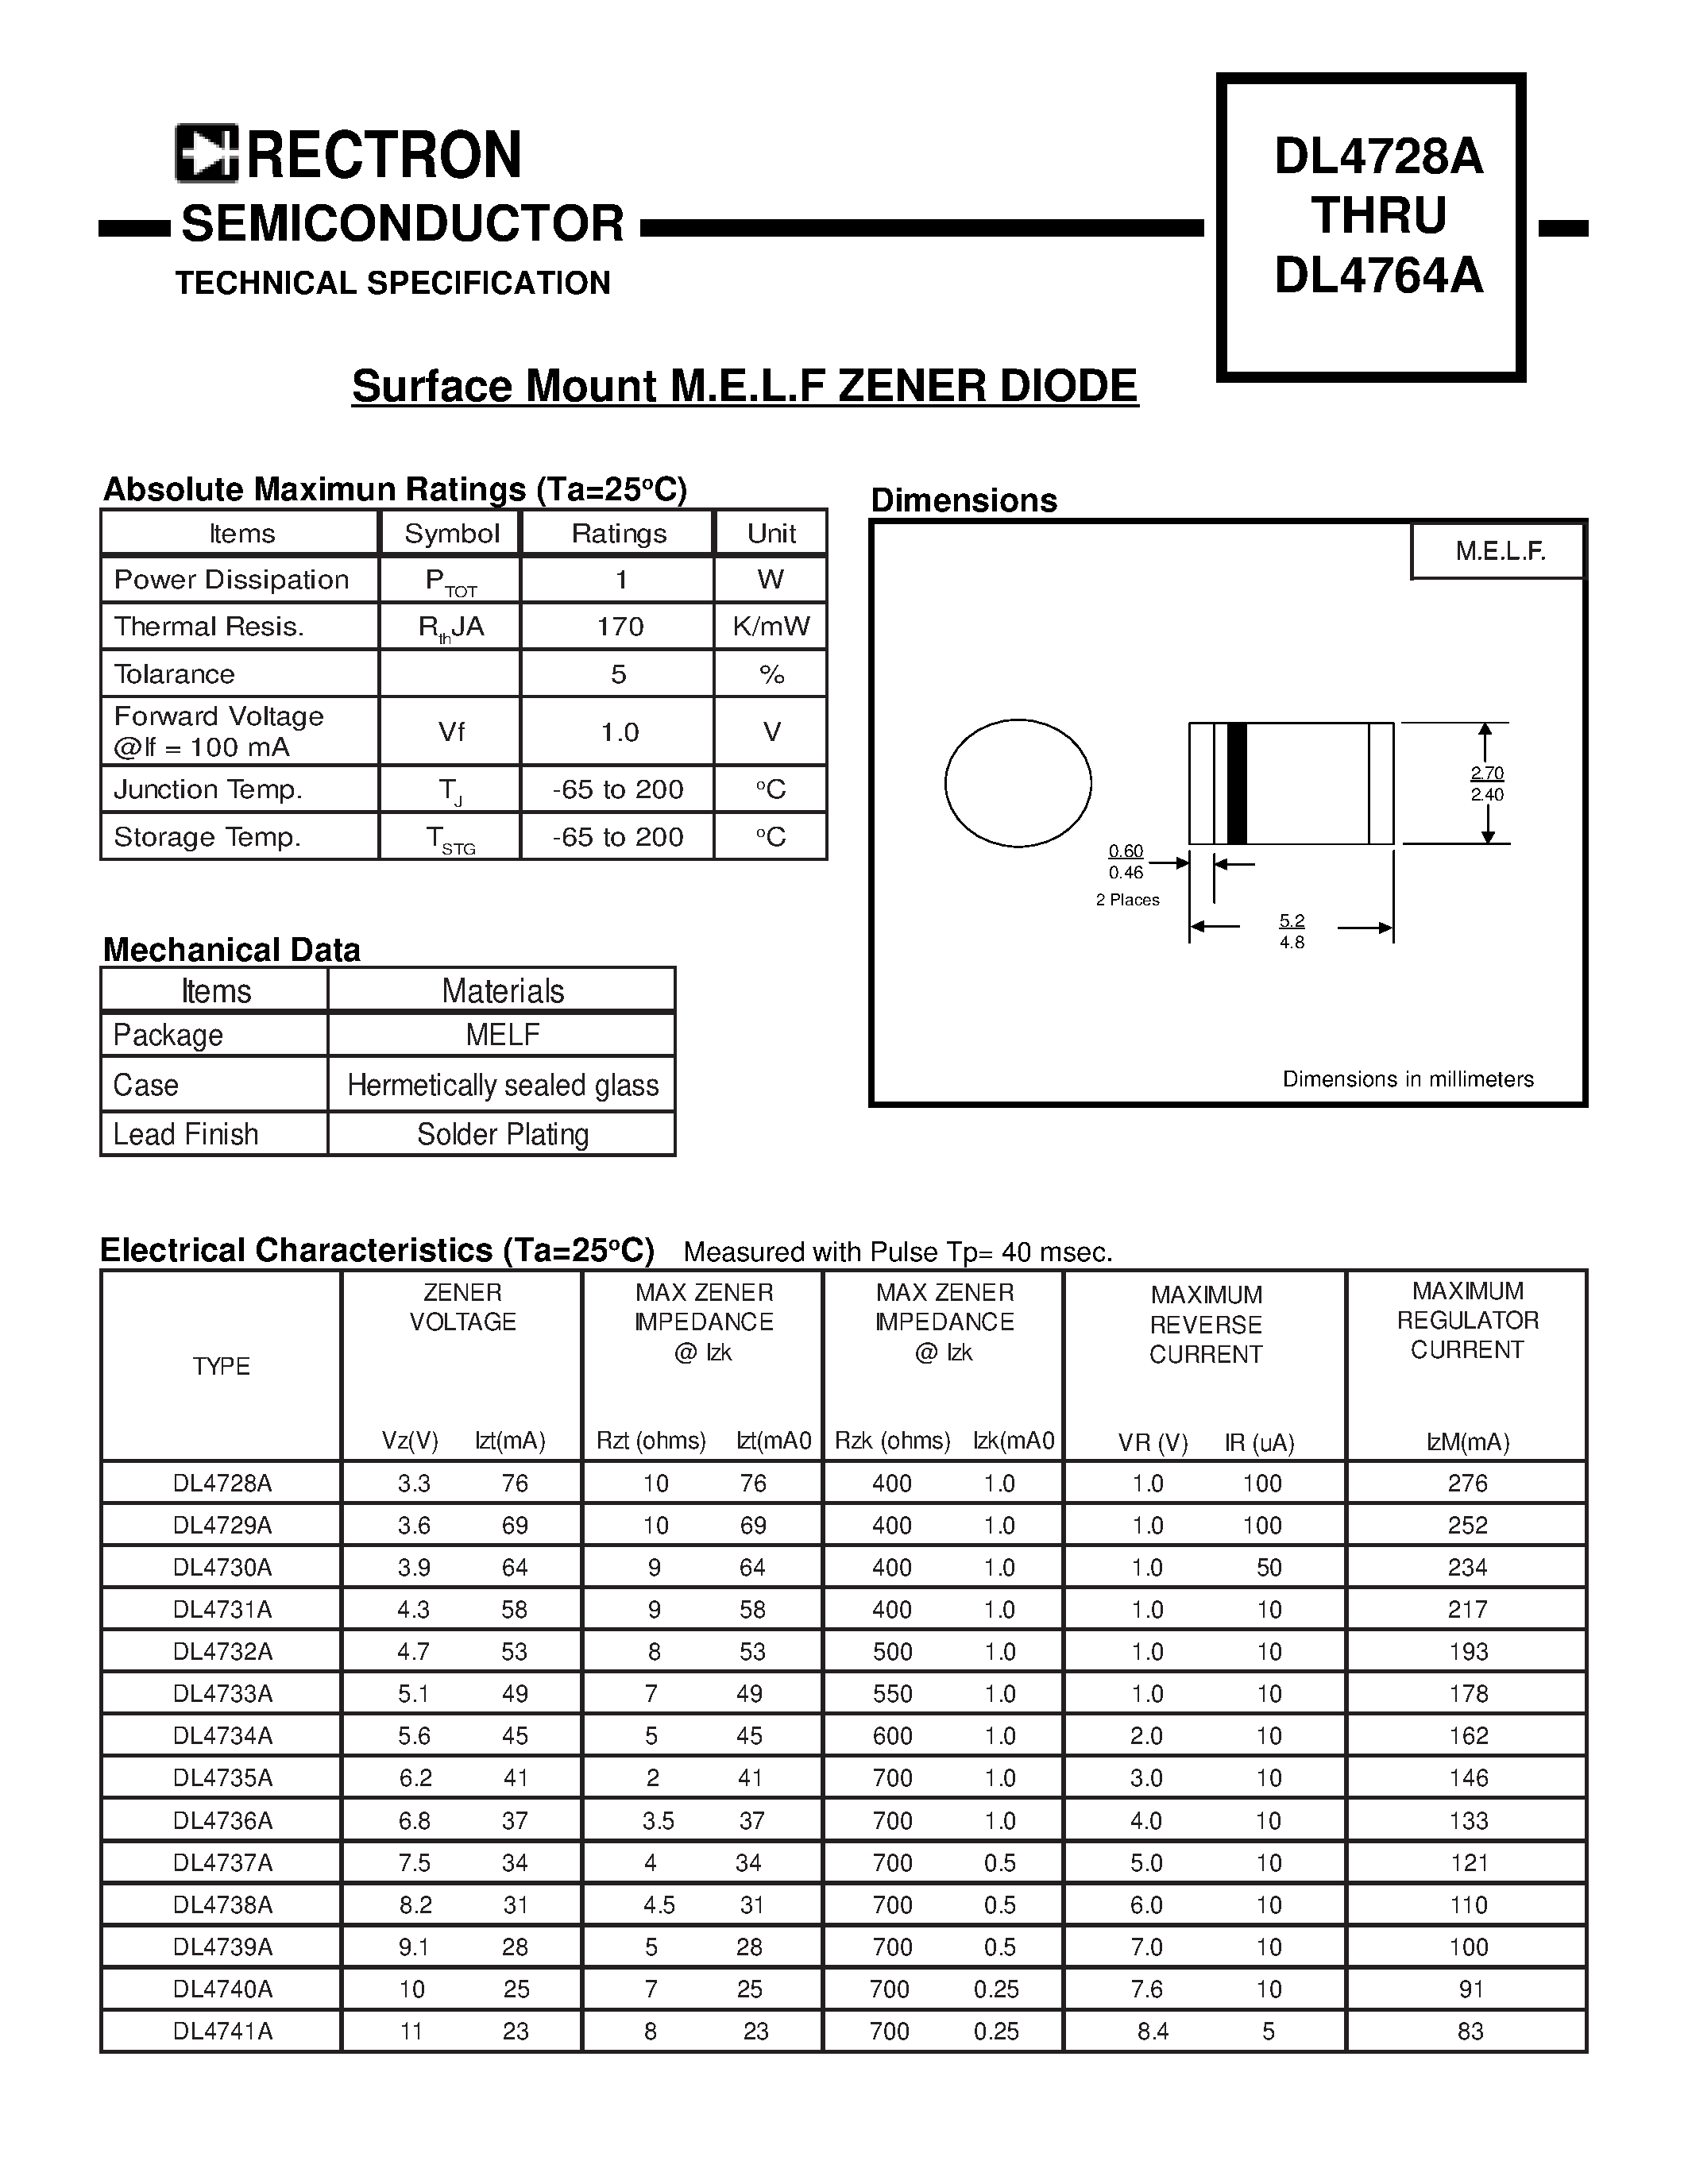 Datasheet DL4759A - Surface Mount M.E.L.F ZENER DIODE page 1